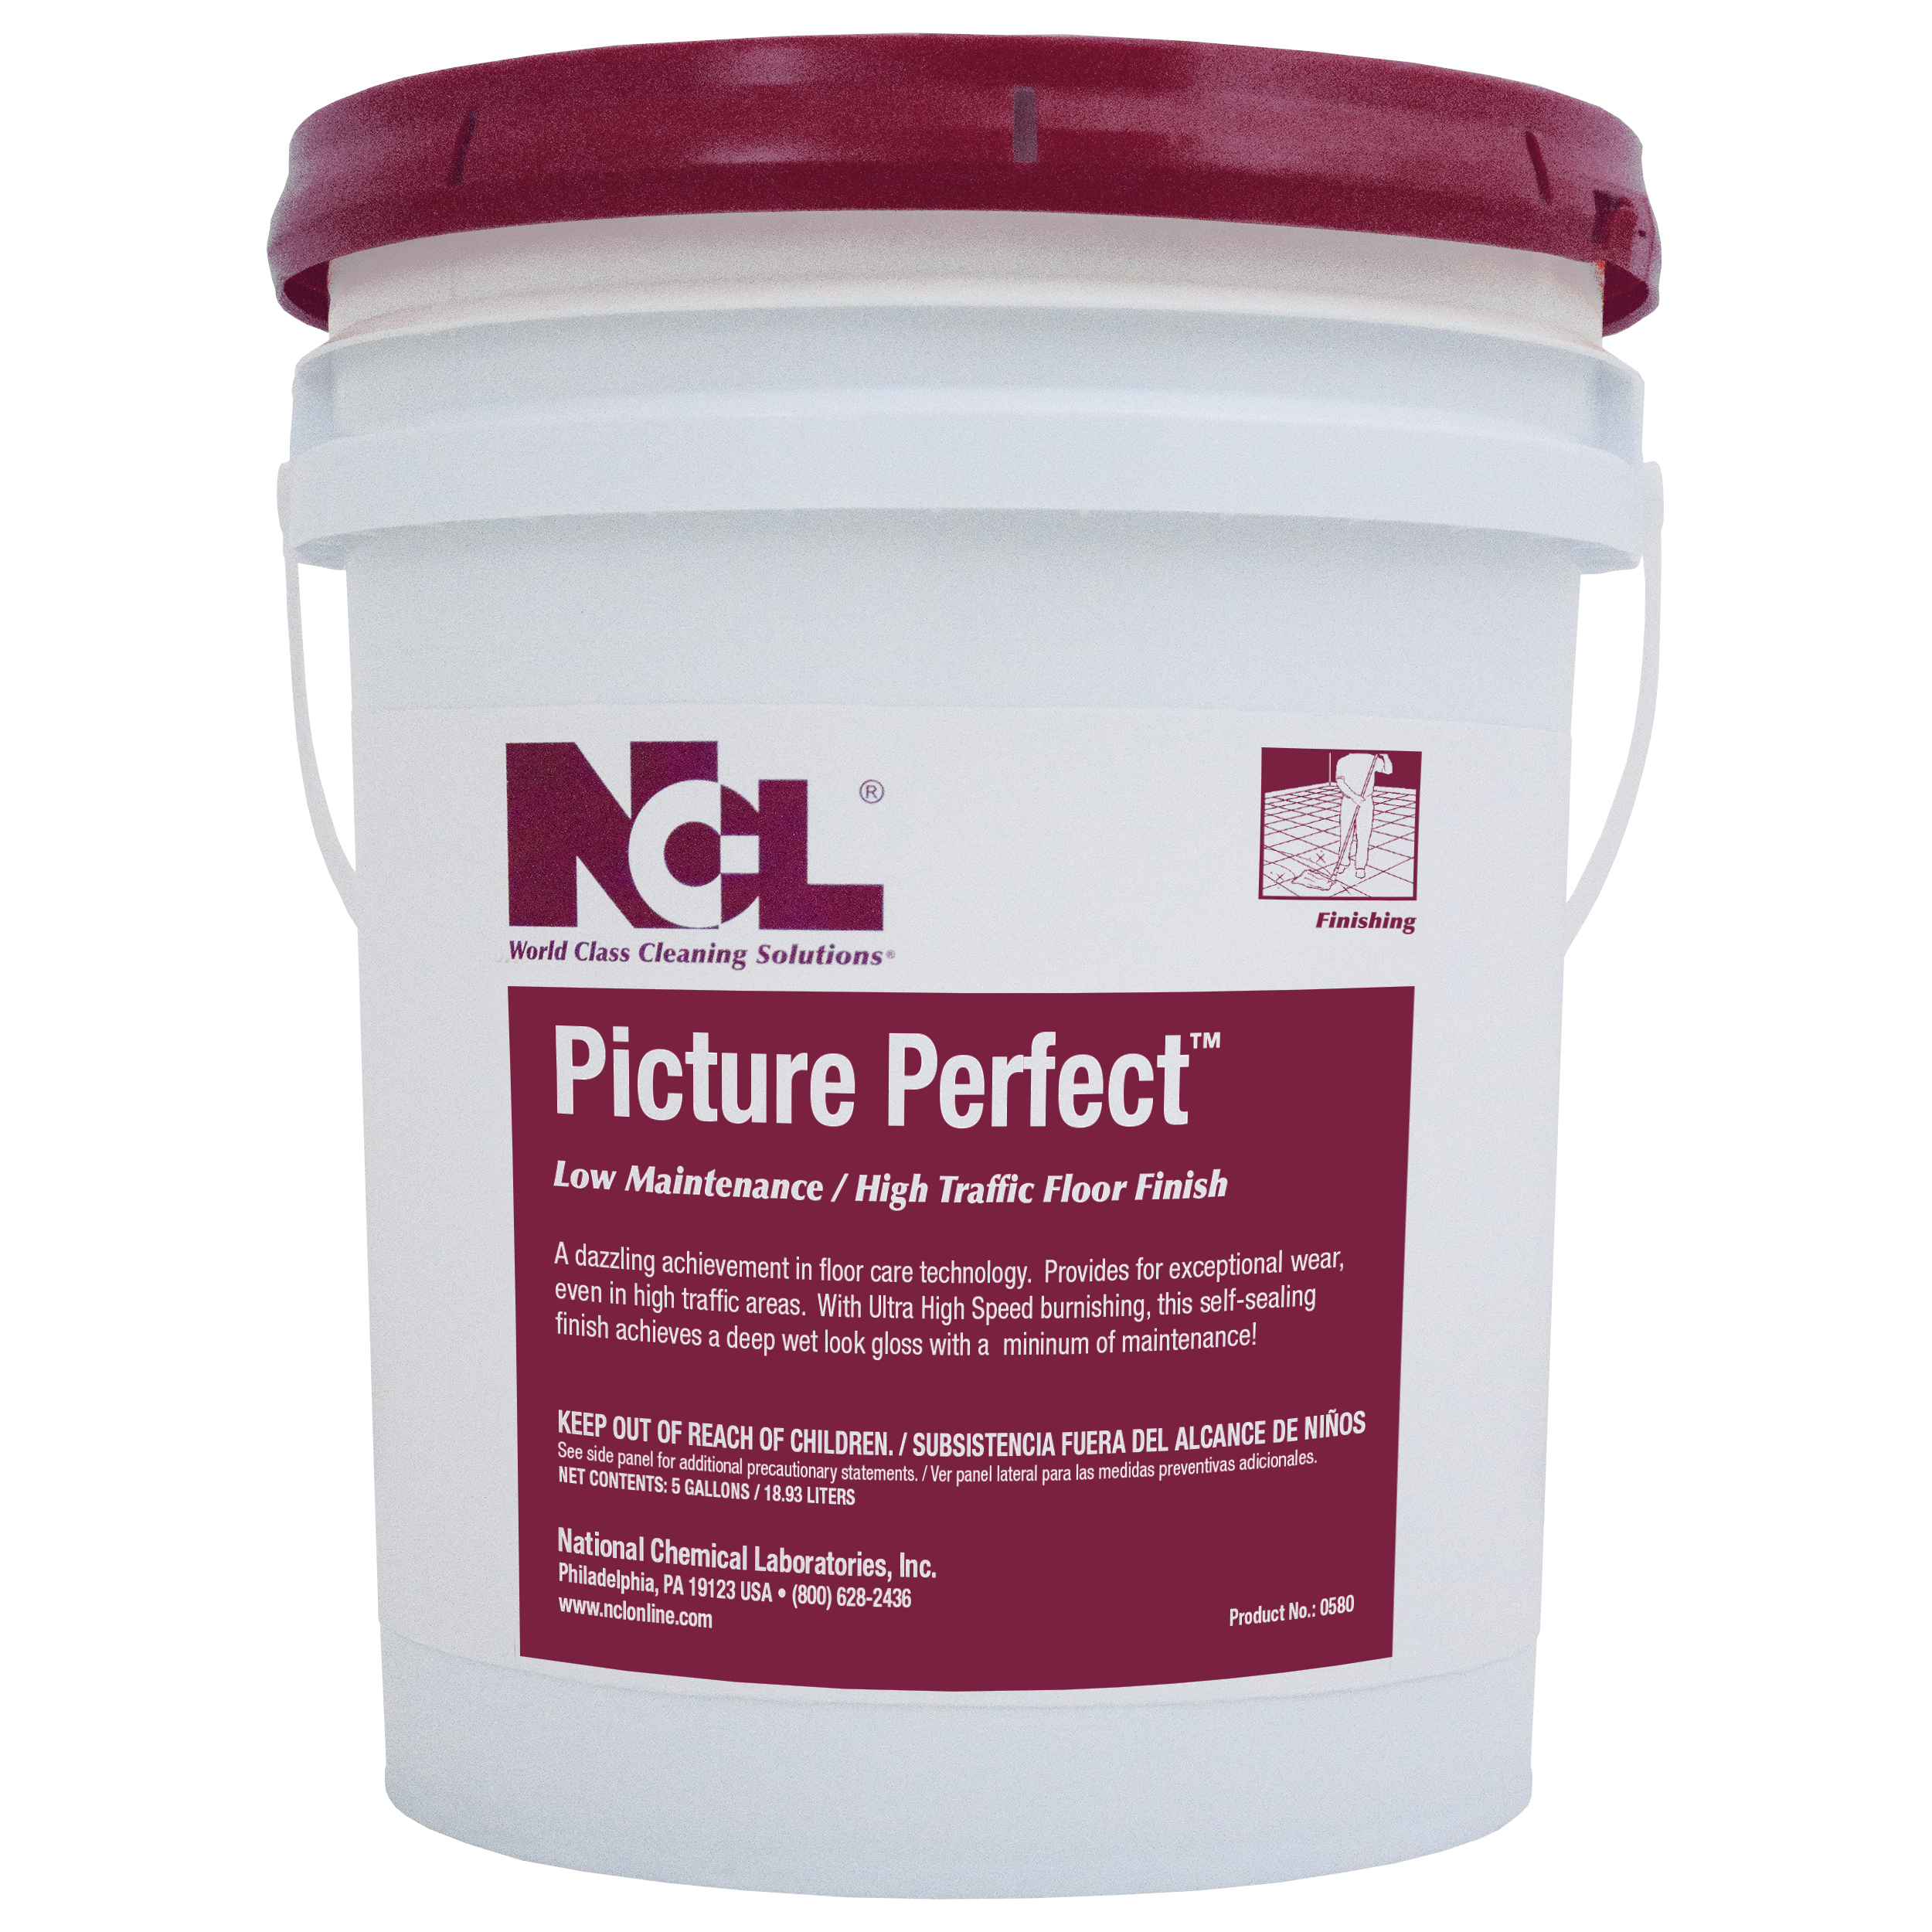  PICTURE PERFECT Low Maintenance / High Traffic UHS Floor Finish 5 Gal. Pail (NCL0580-21) 